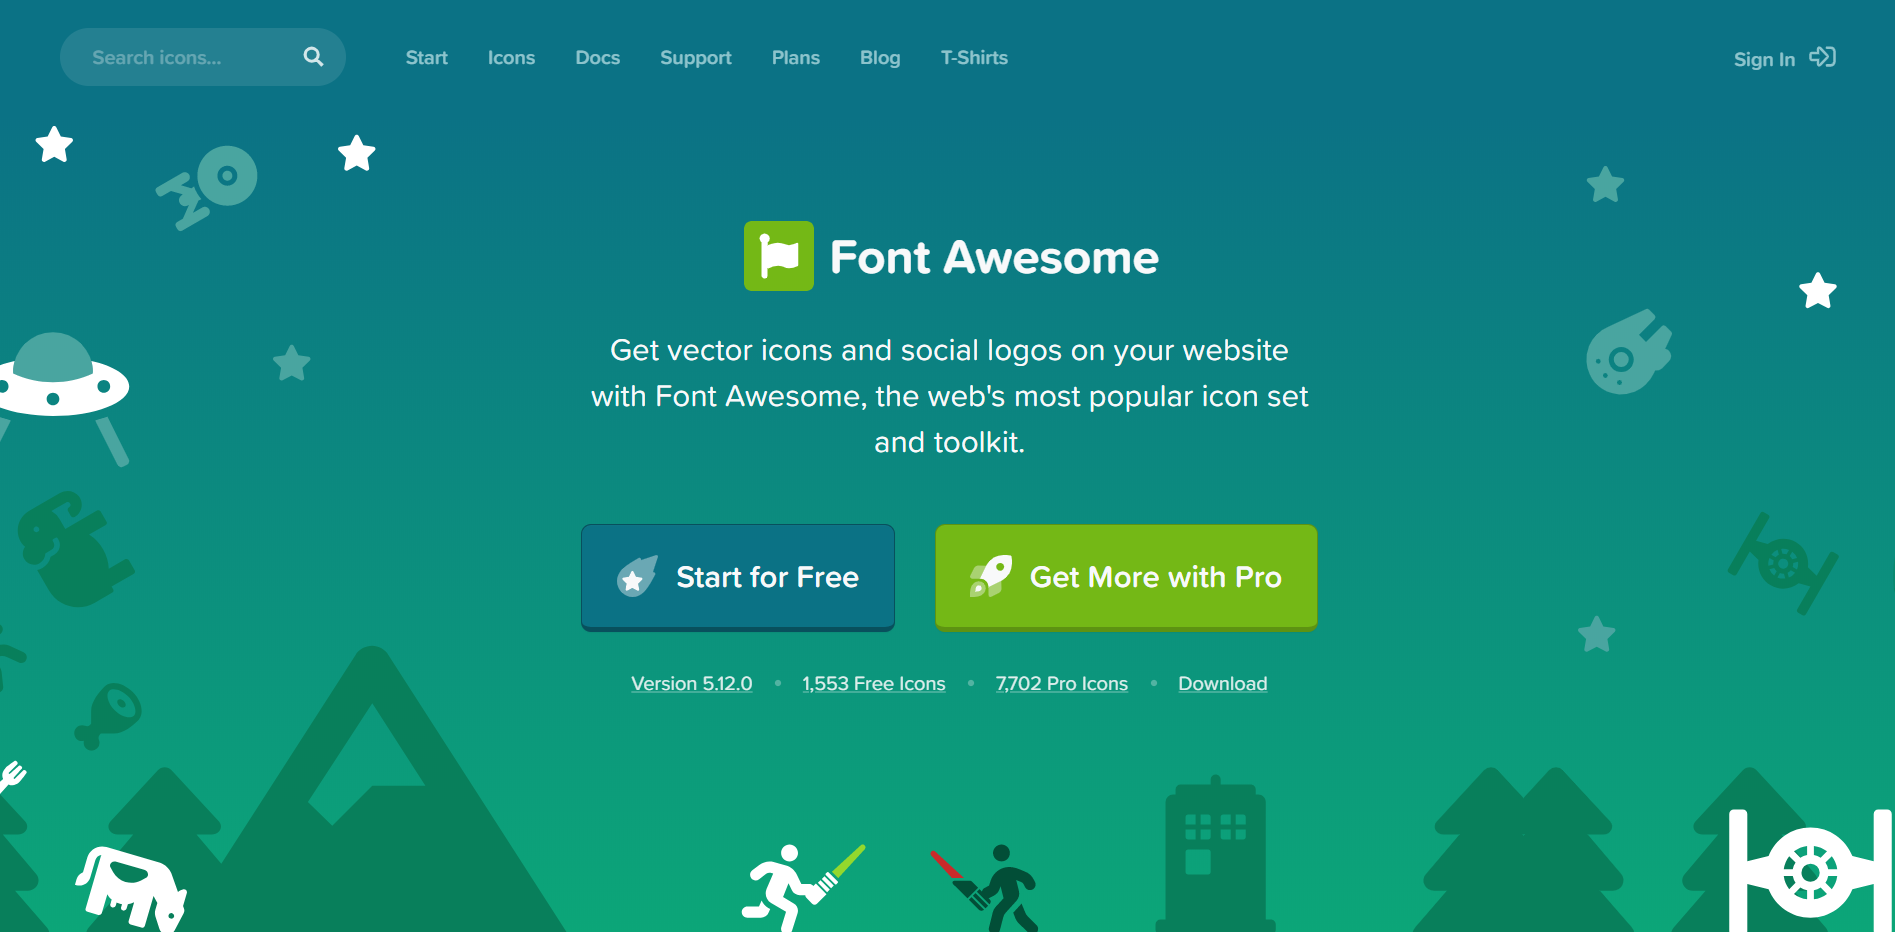 Font Awesome landing page